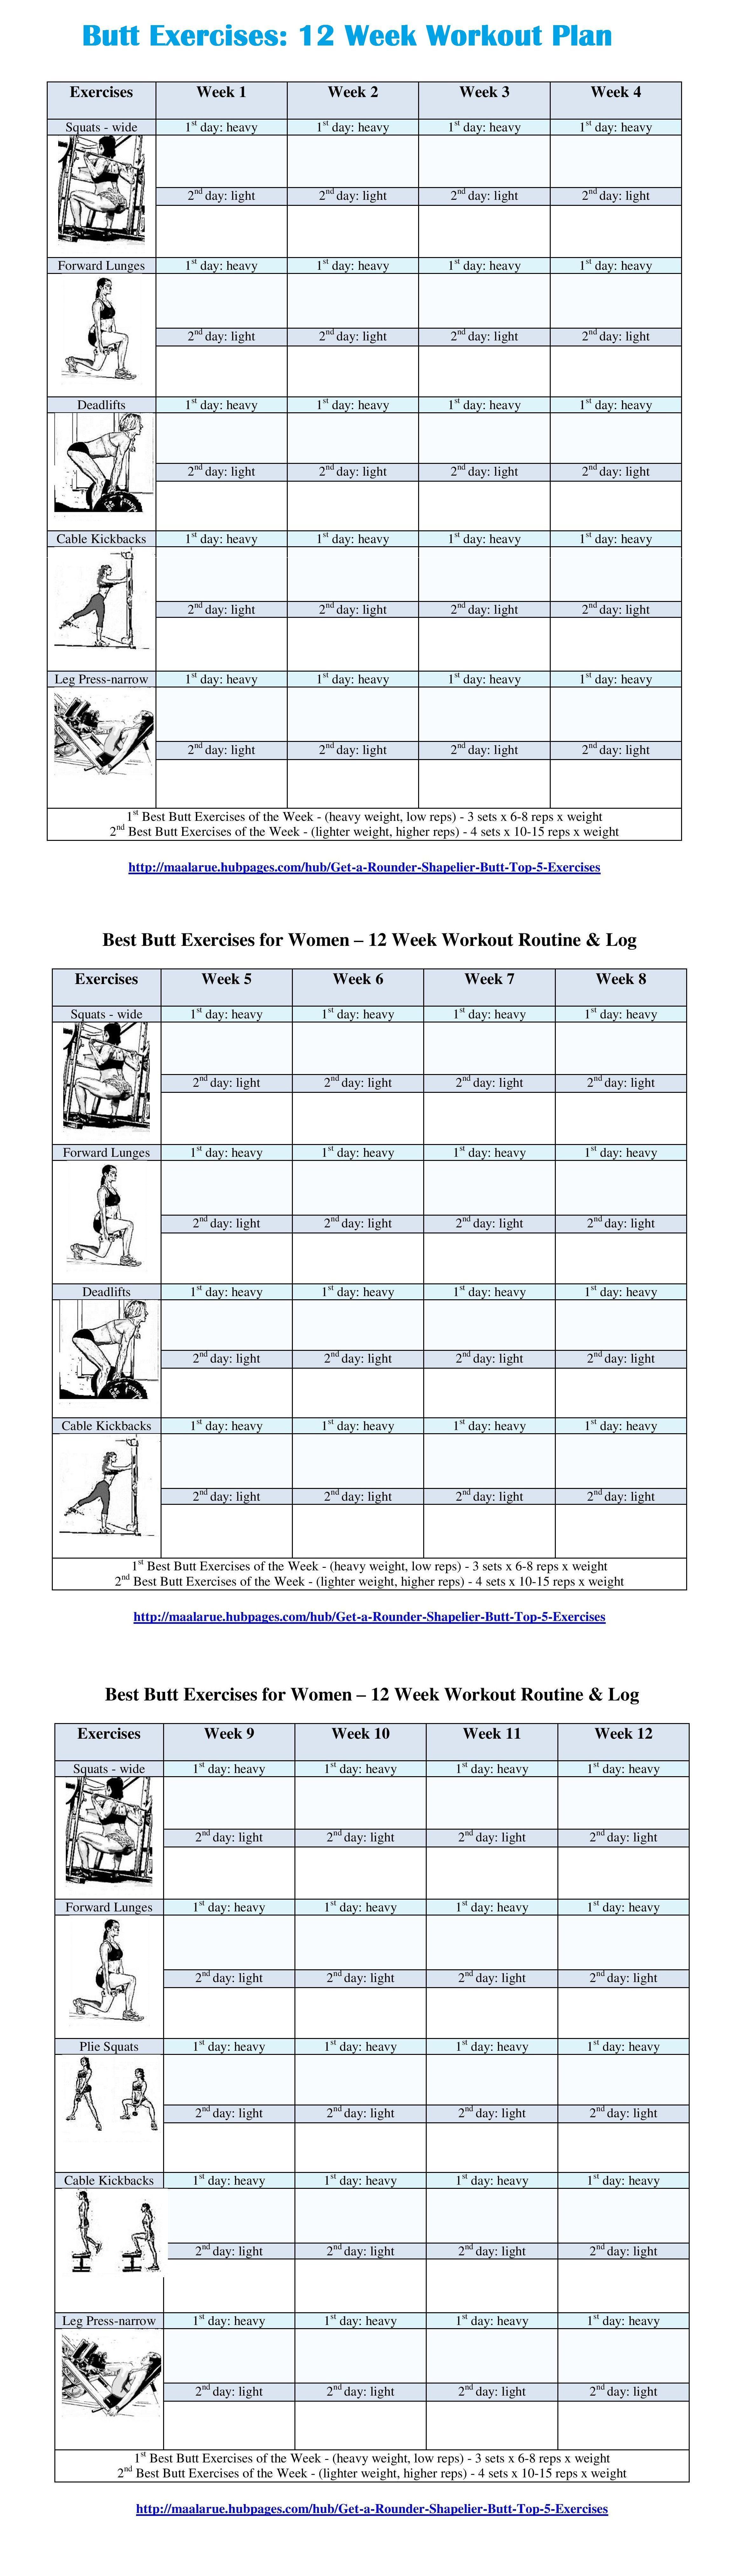 Best Butt Workouts For Women - Free Printable 12 Week Butt Workout Plan - Free Printable Workout Plans